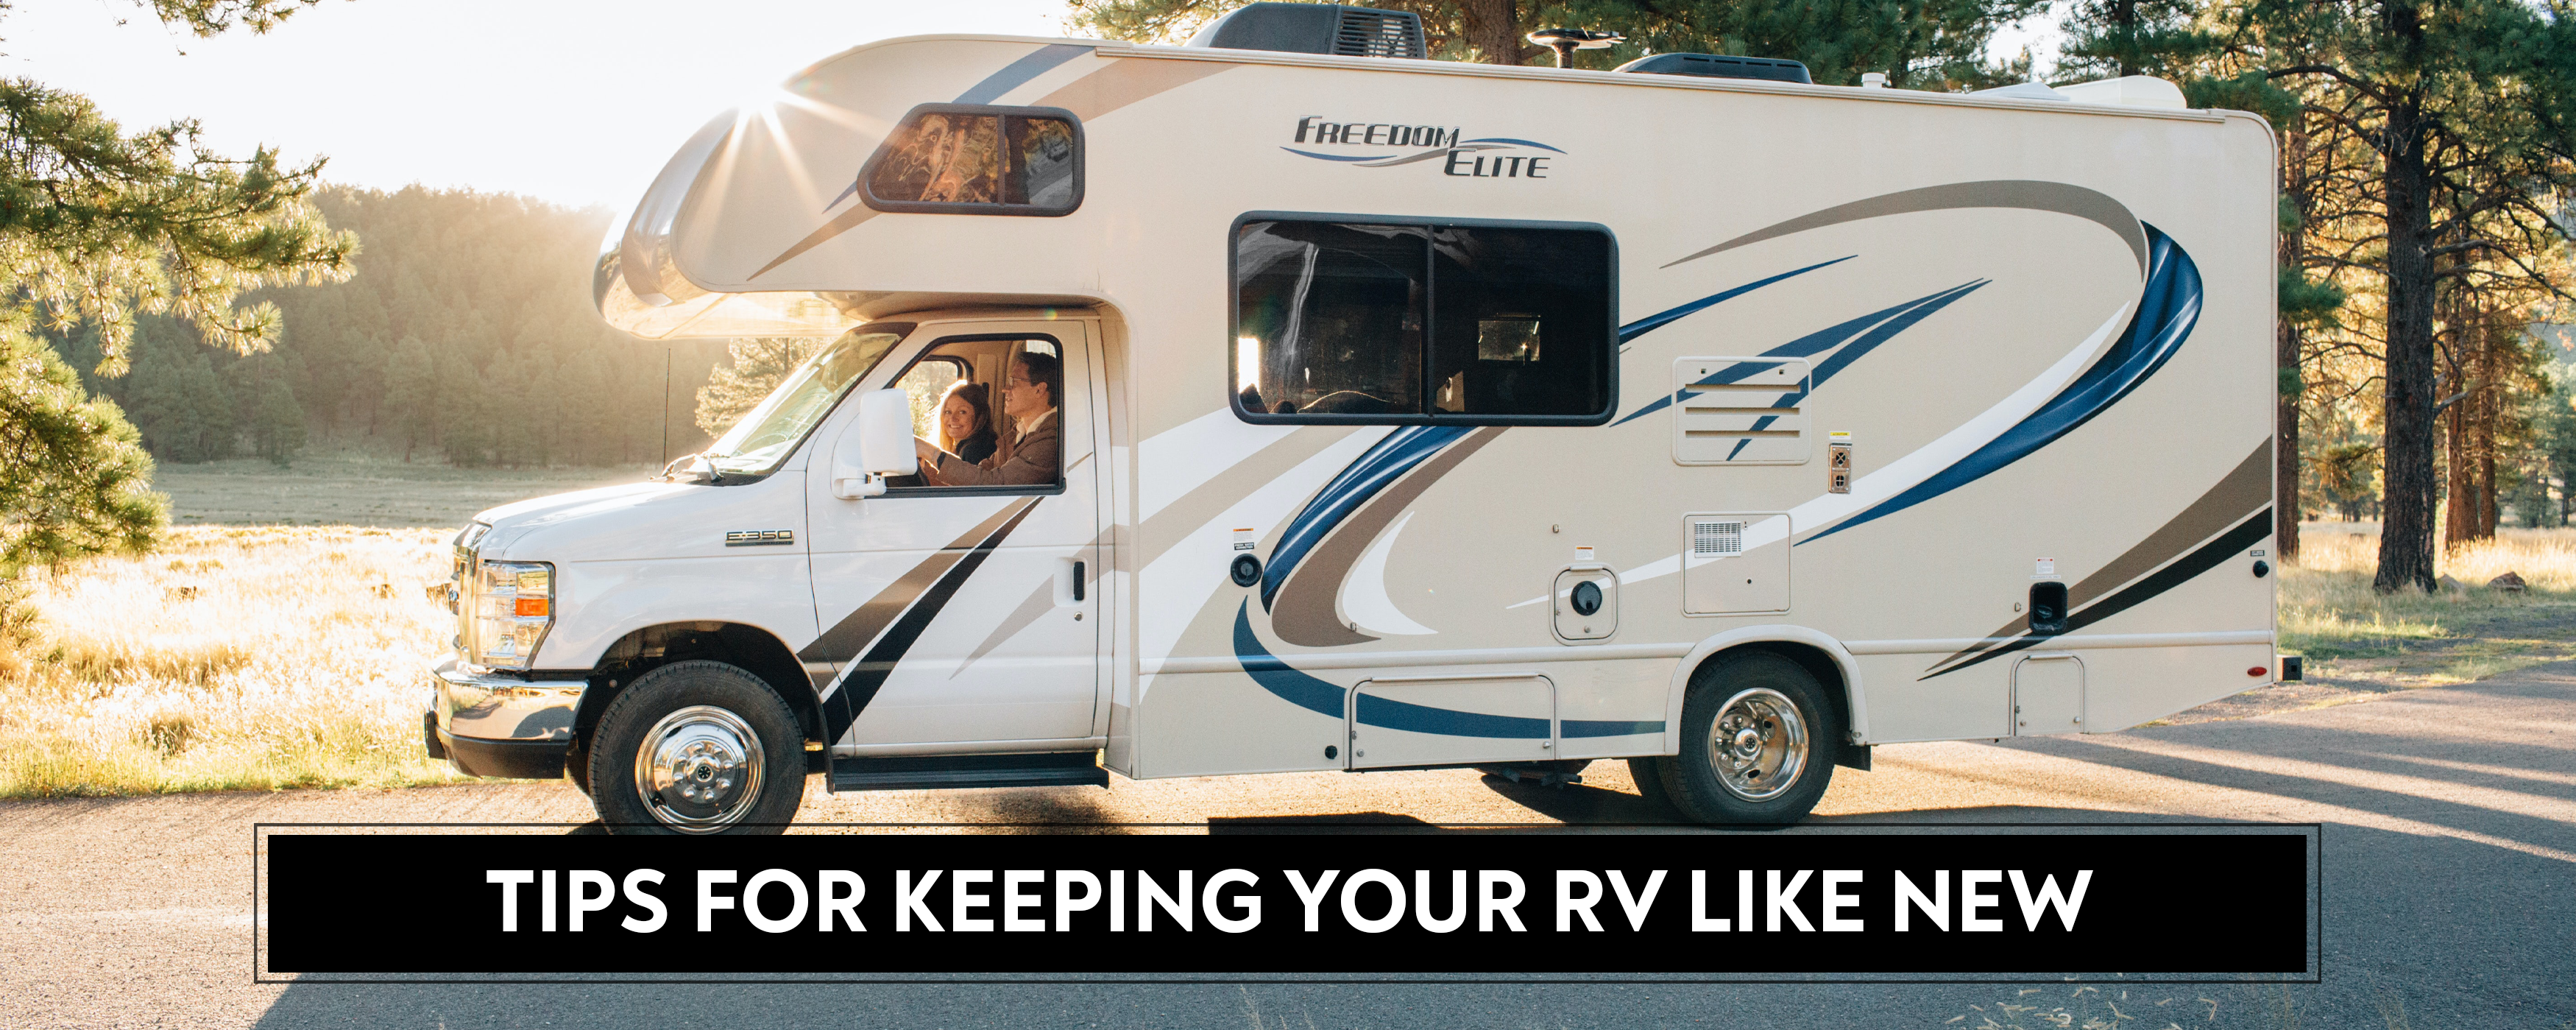 Top Tips for Keeping Your RV Exterior Clean and Protected